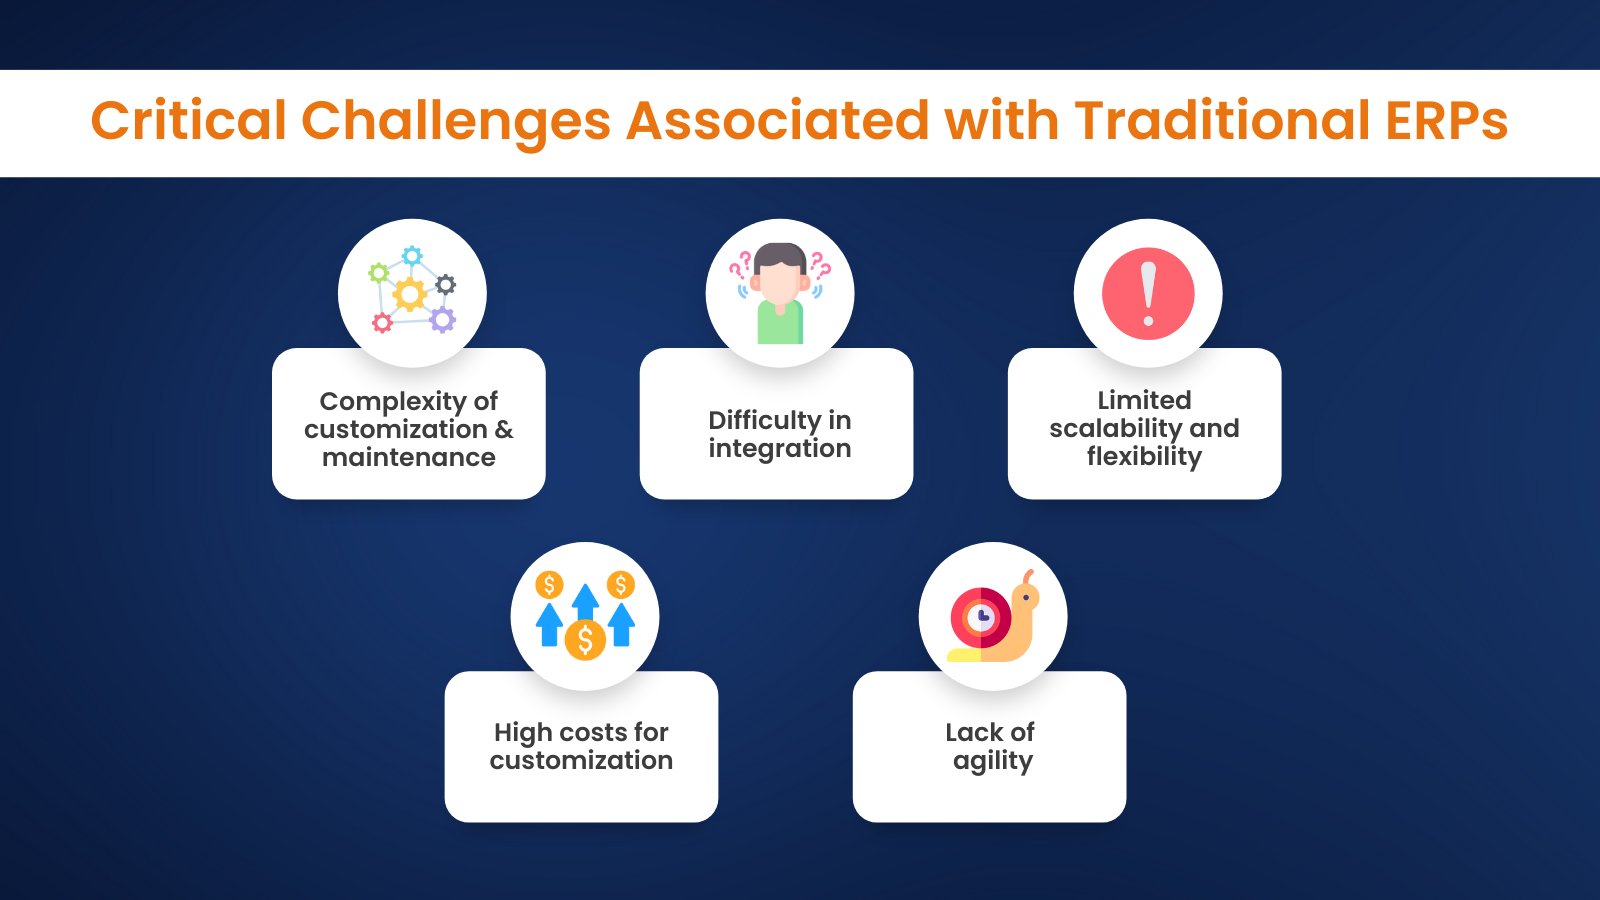 Critical challenges associated with traditional ERPs